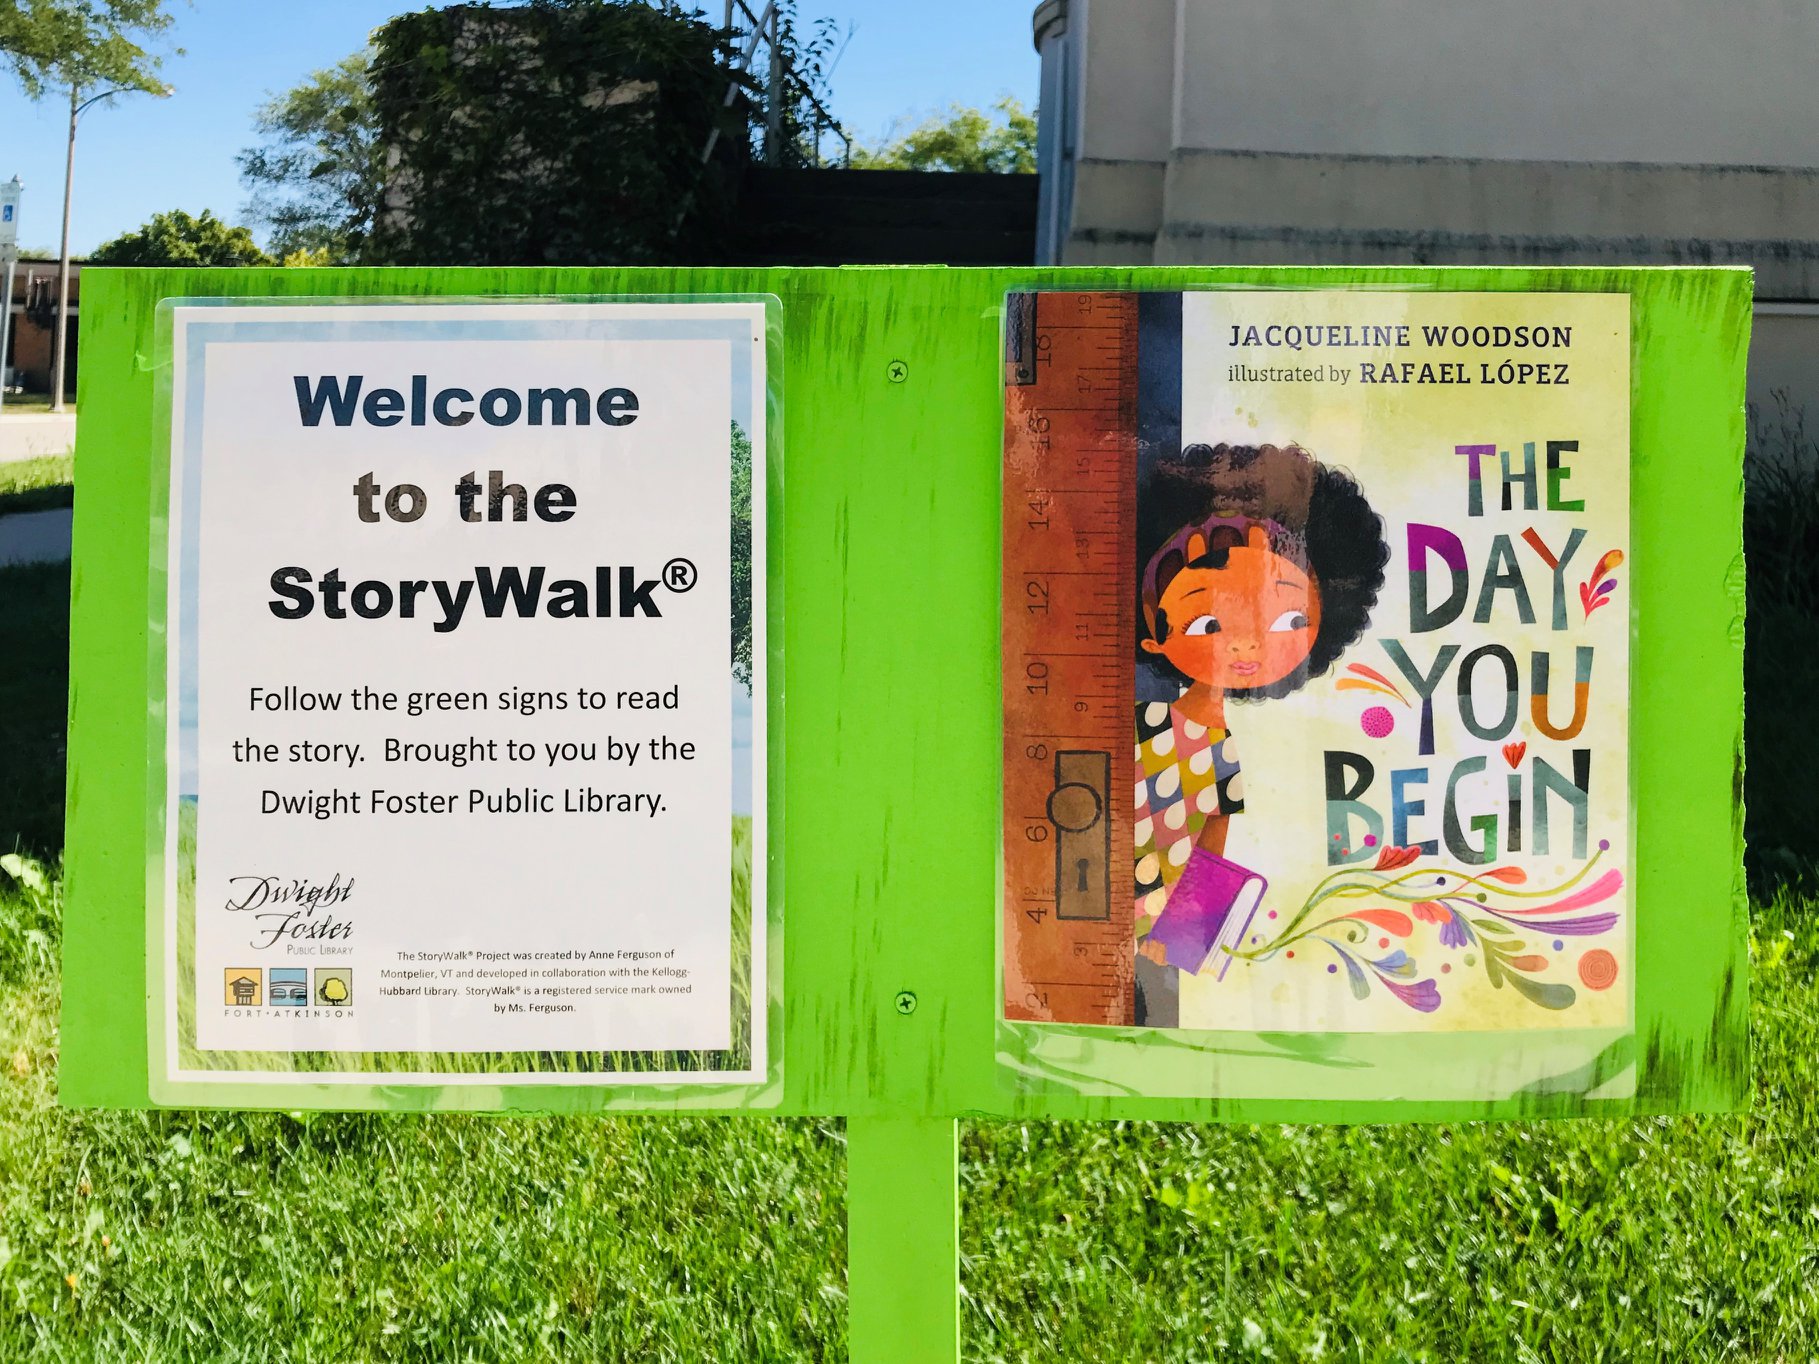 Green wooden board with title page of the book "The Day You Begin" attached to it. The board is standing outside the library. Another sign on the board says "Welcome to the StoryWalk"